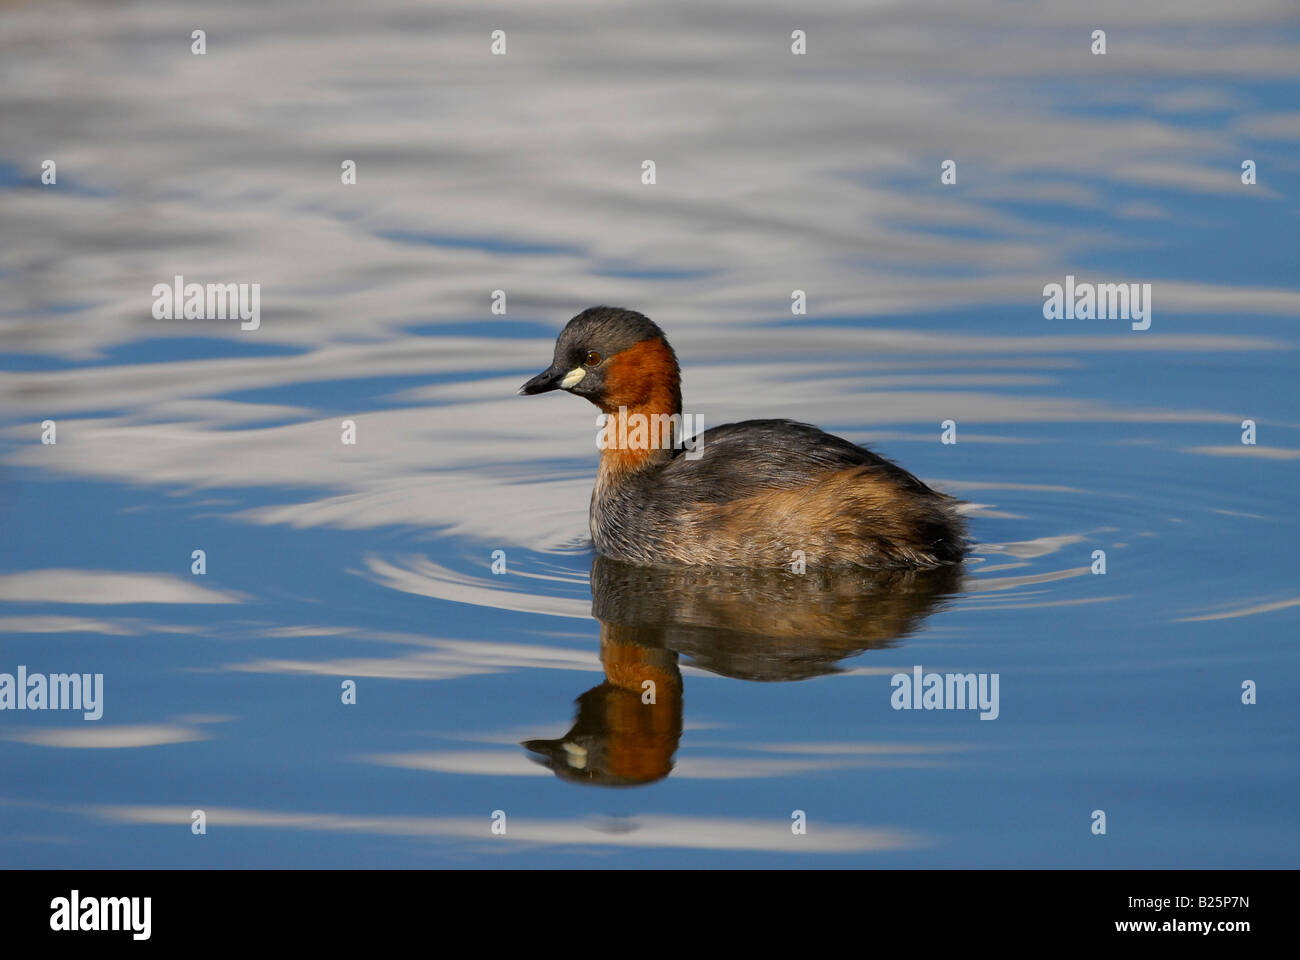 Dabchick or Little Grebe, Tachybaptus ruficollis, on calm blue water, Paarl Bird Sanctuary, Cape Town, South Africa Stock Photo